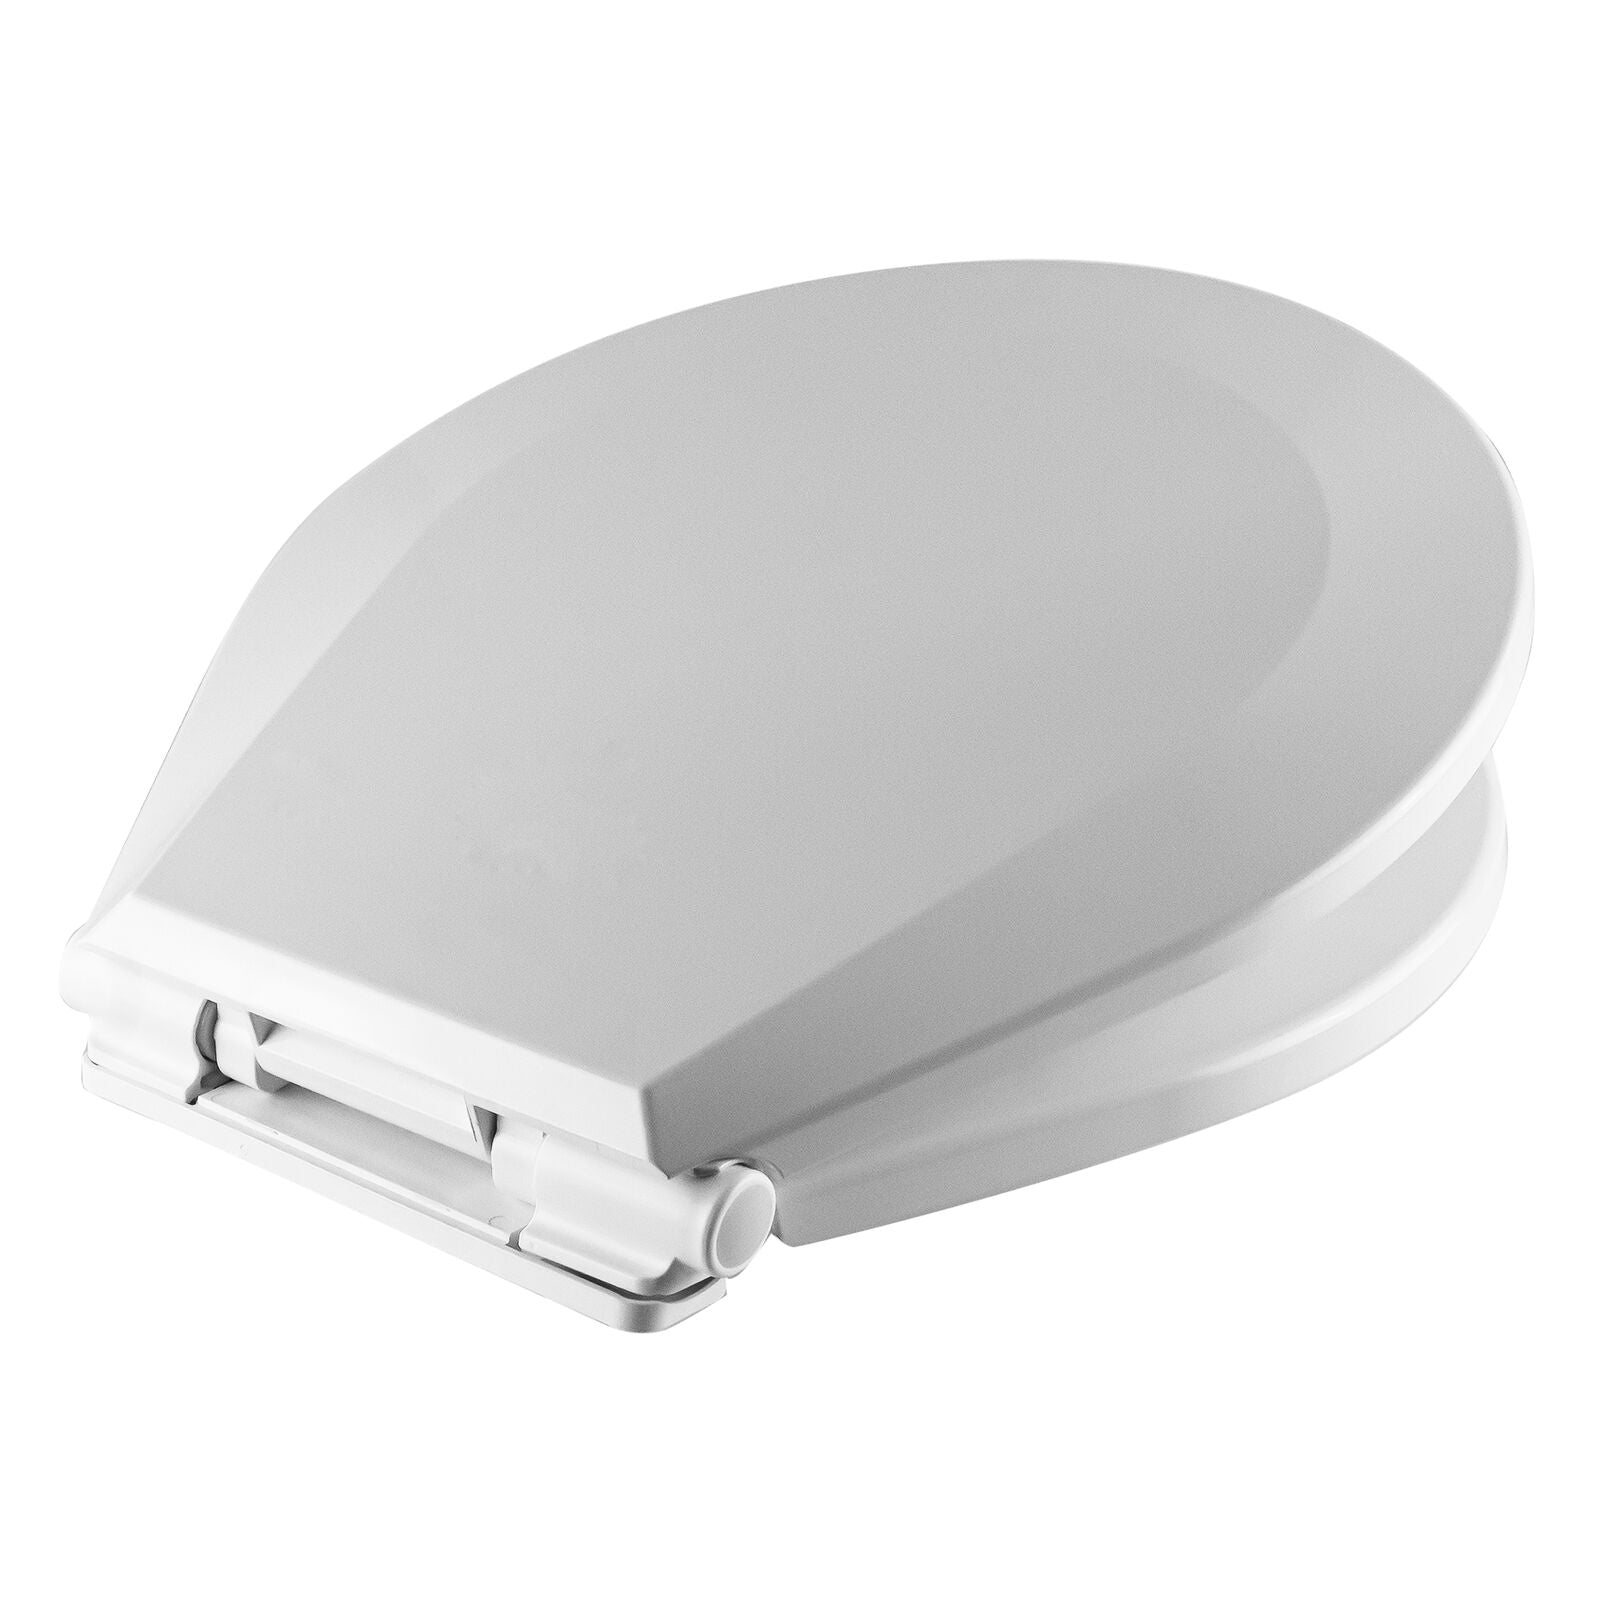 Delux Toilet Seat and Cover